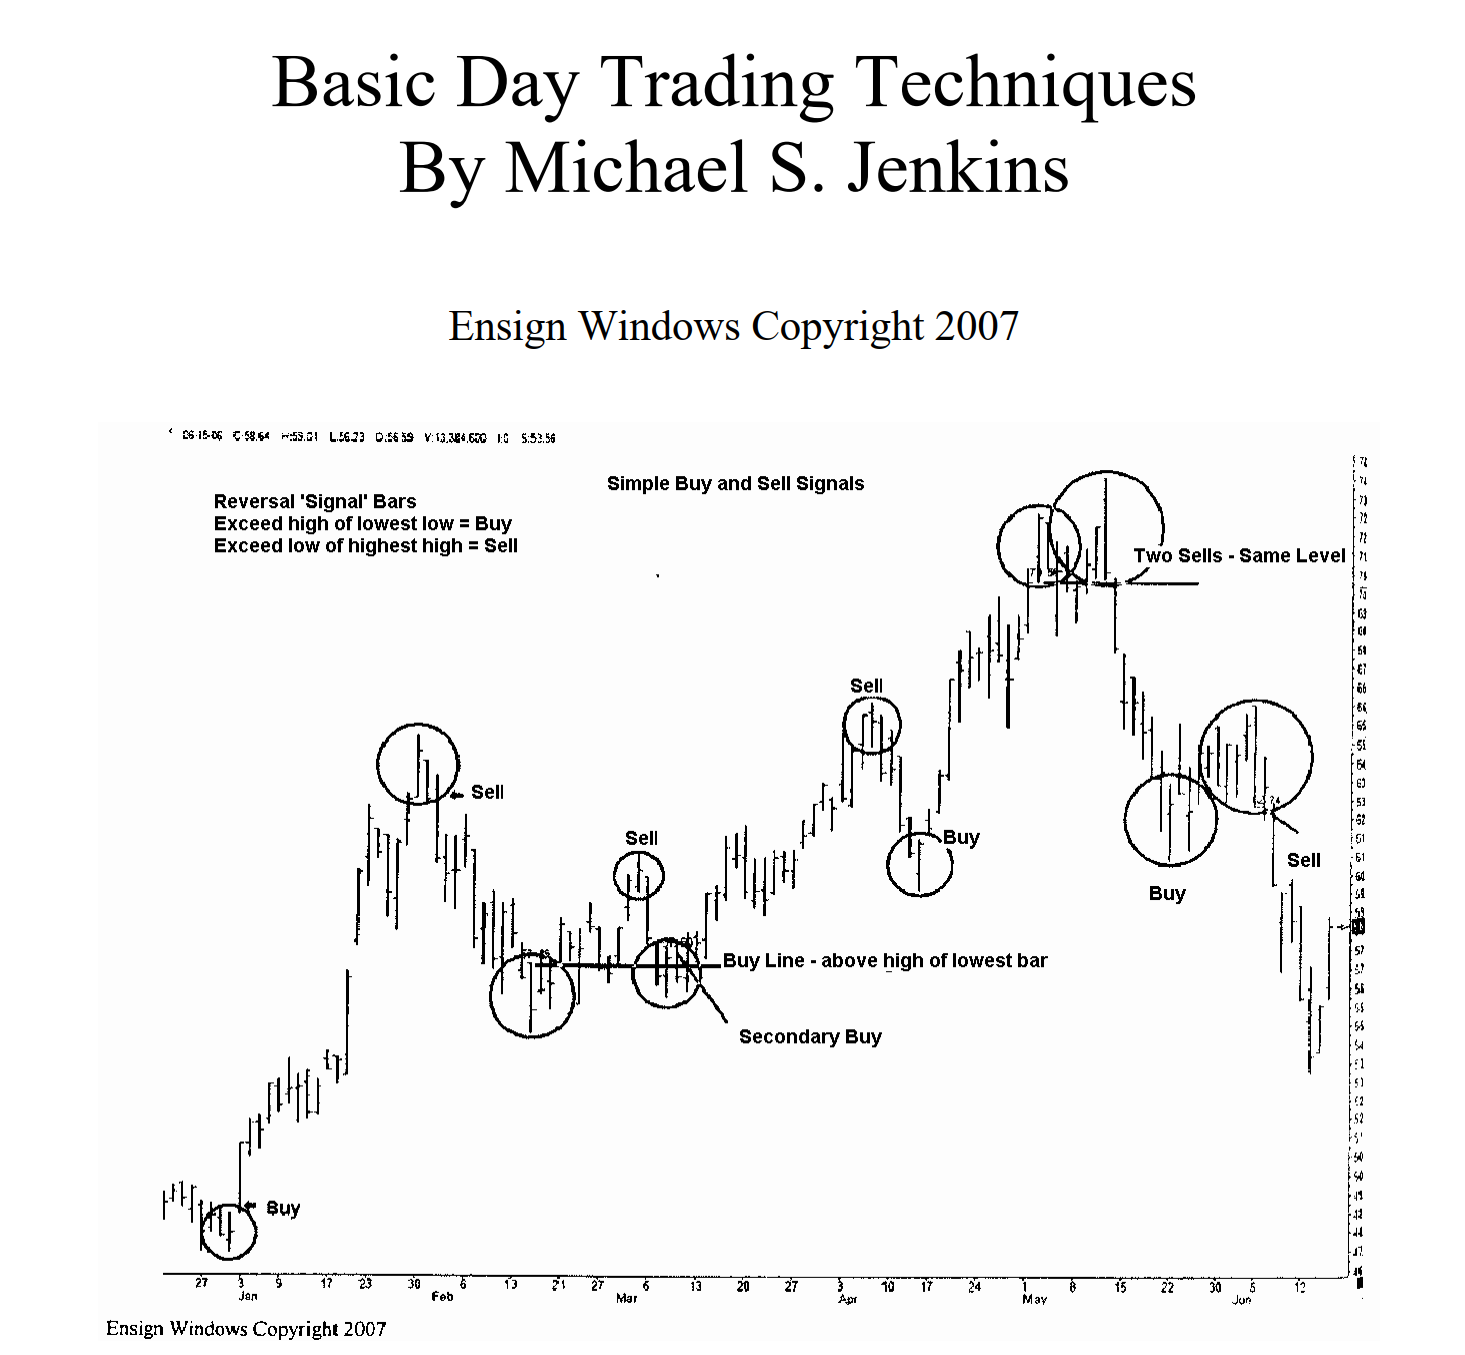 Basic Day Trading Techniques By Michael S. Jenkins